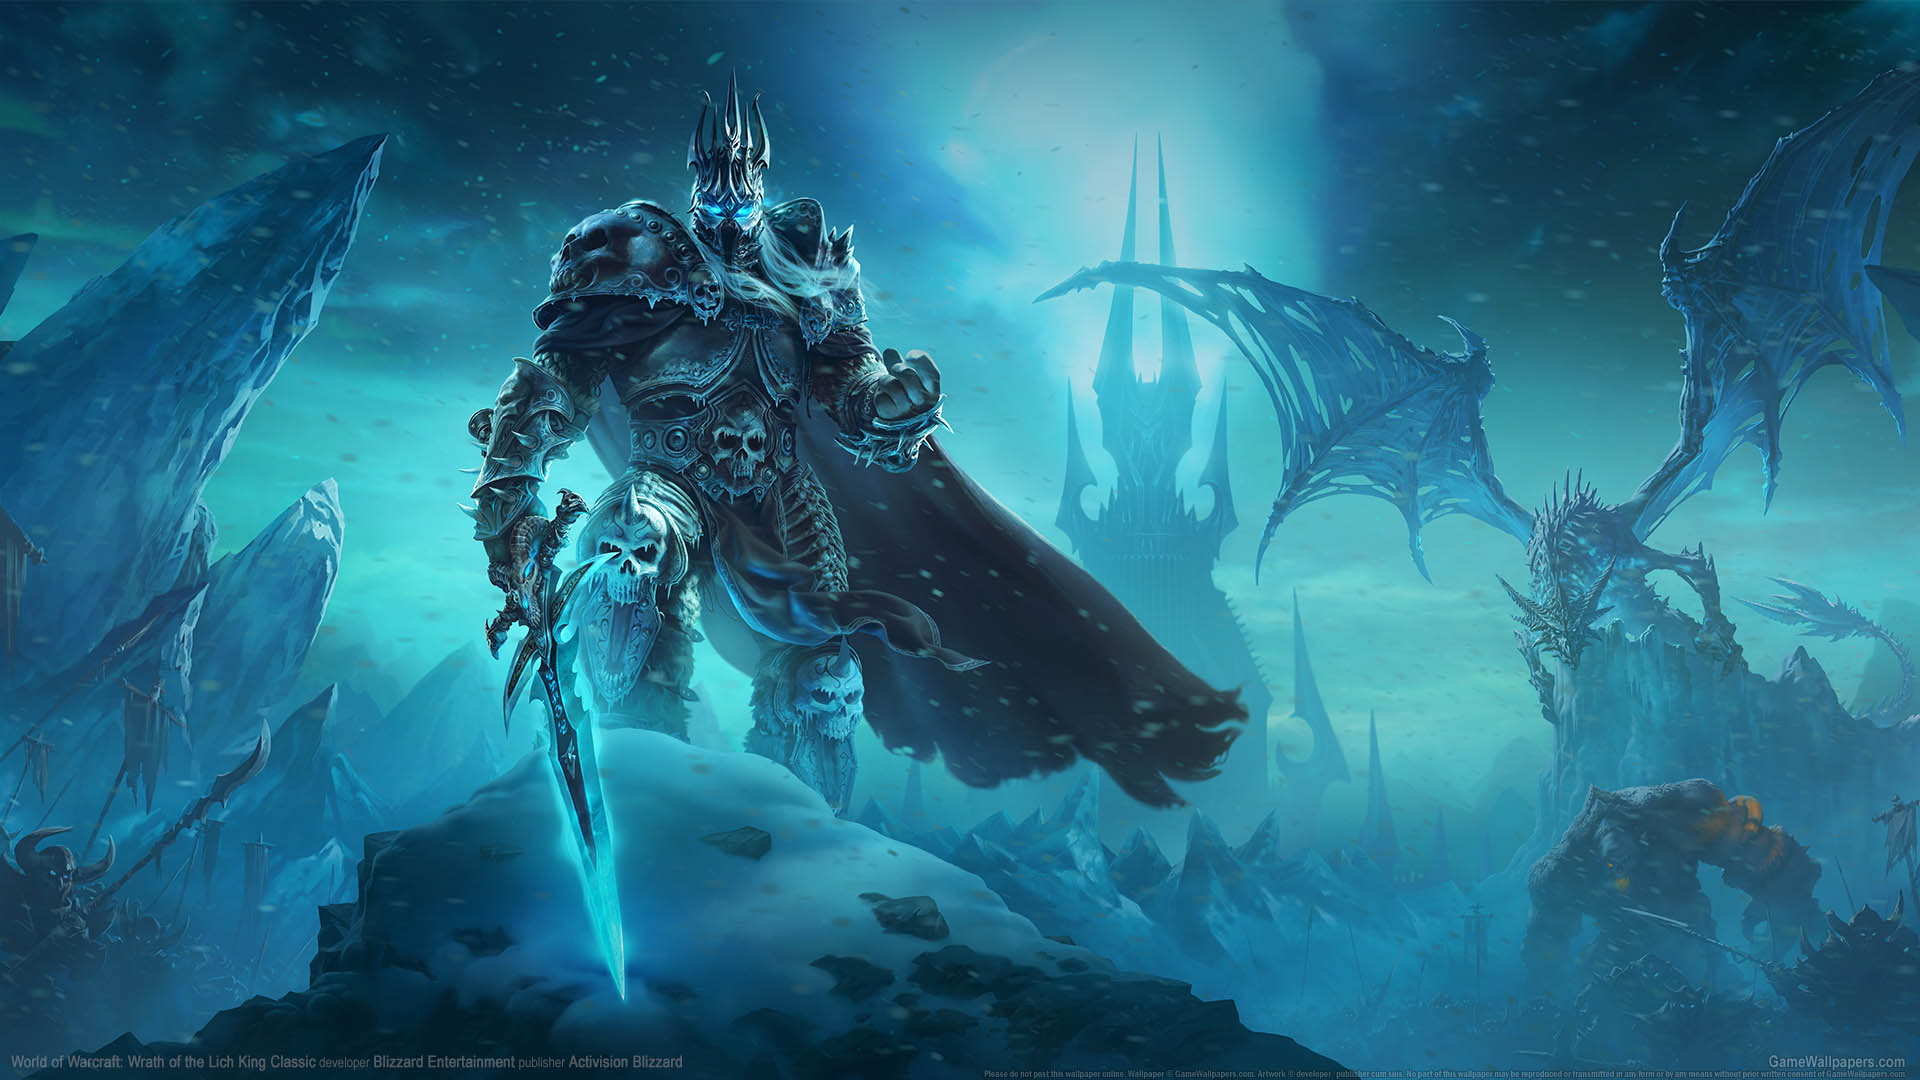 World of Warcraft: Wrath of the Lich King Classic fond d'cran 01 1920x1080